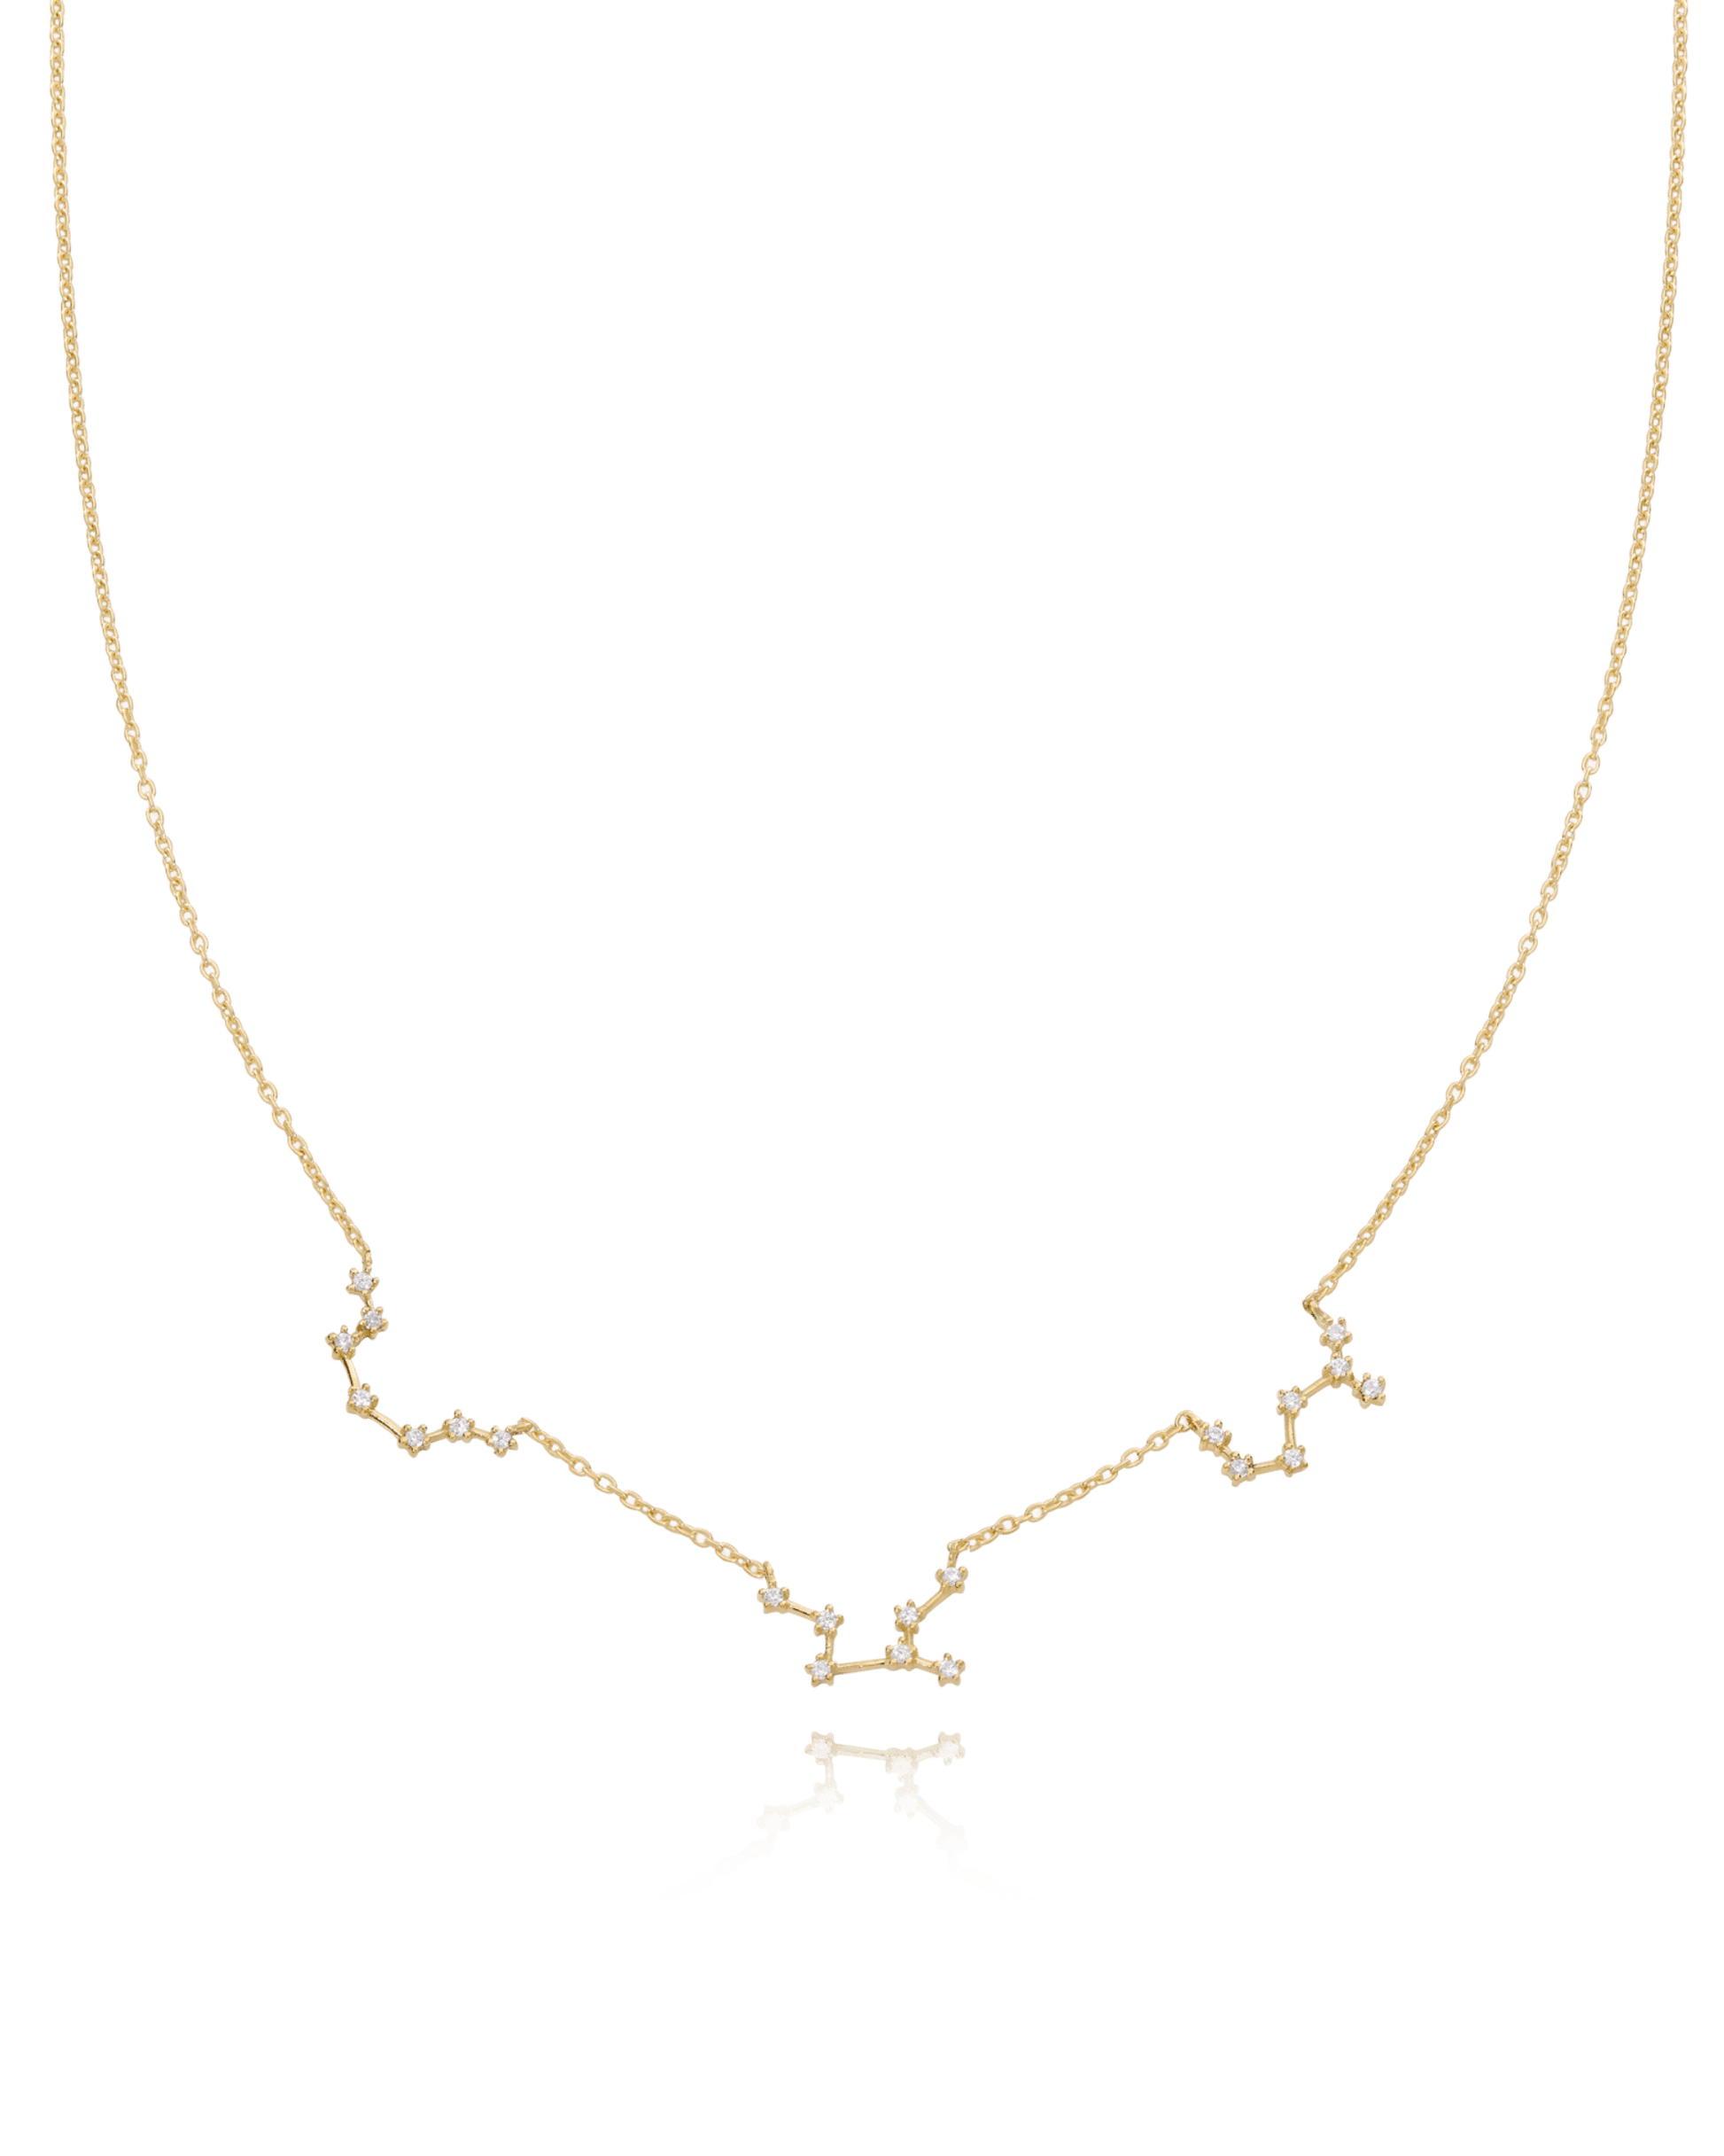 Constellation Necklace with Diamonds - 18K Gold Vermeil Necklaces magal-dev 1 Constellation 16" 